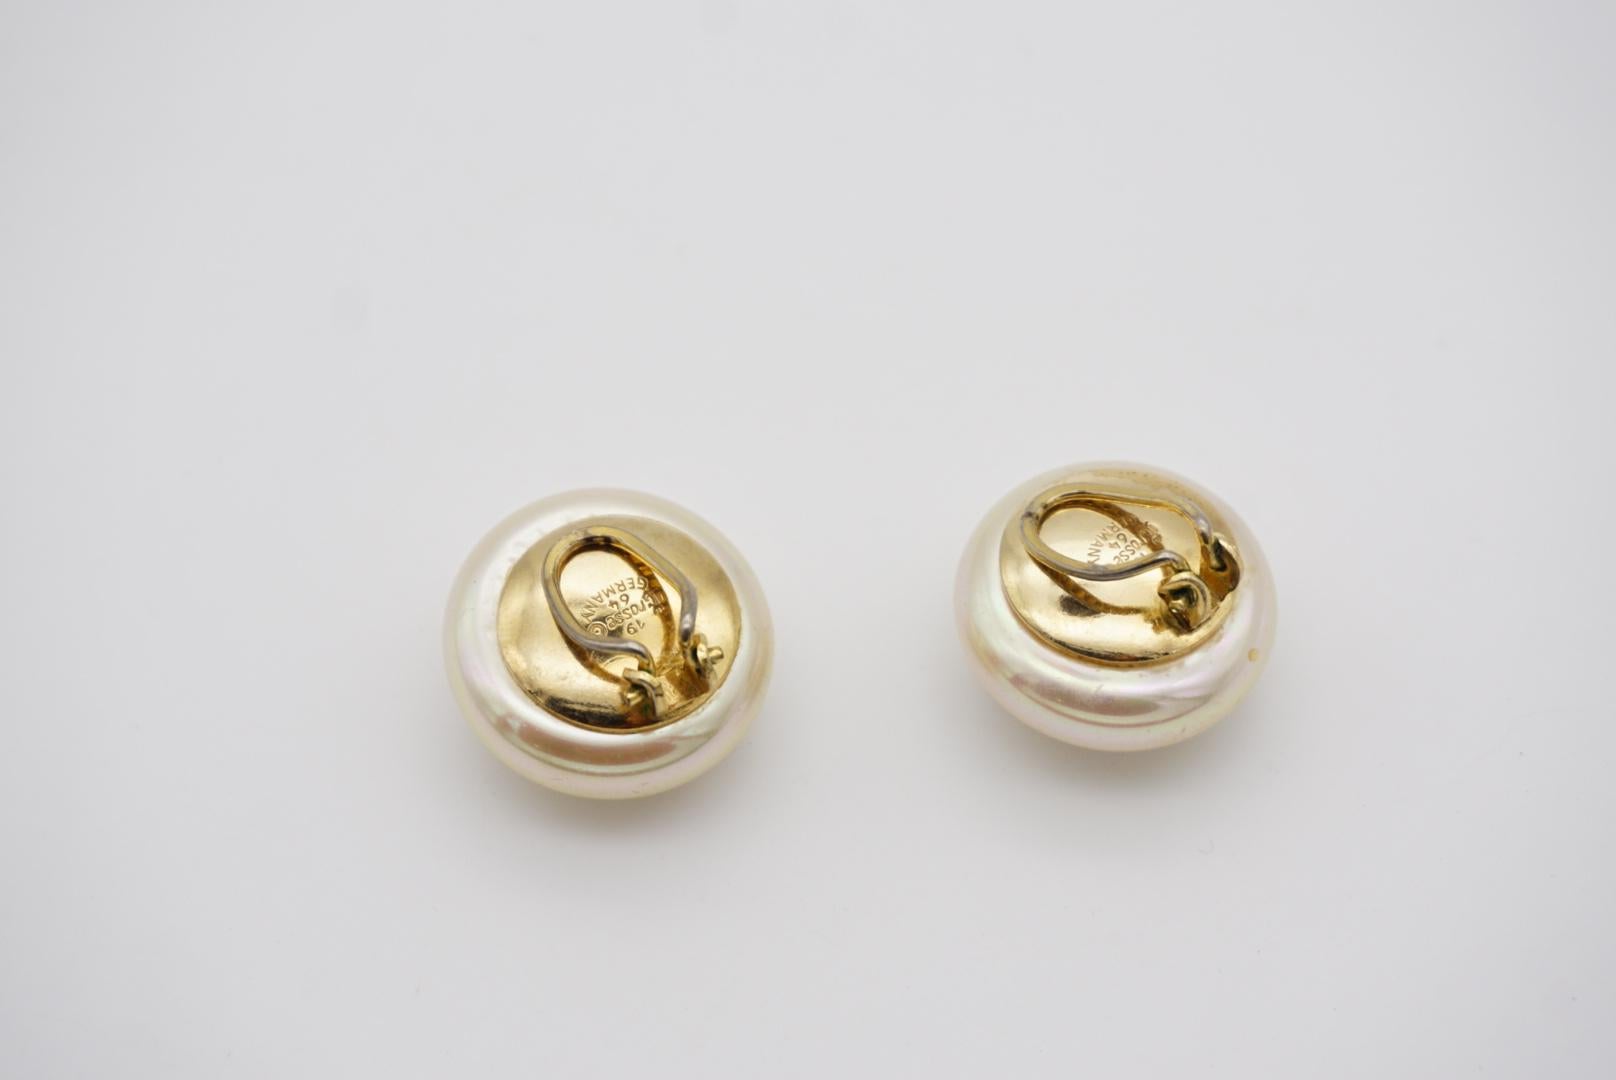 Christian Dior GROSSE 1964 Vintage Large Round White Pearl Gold Clip Earrings For Sale 1